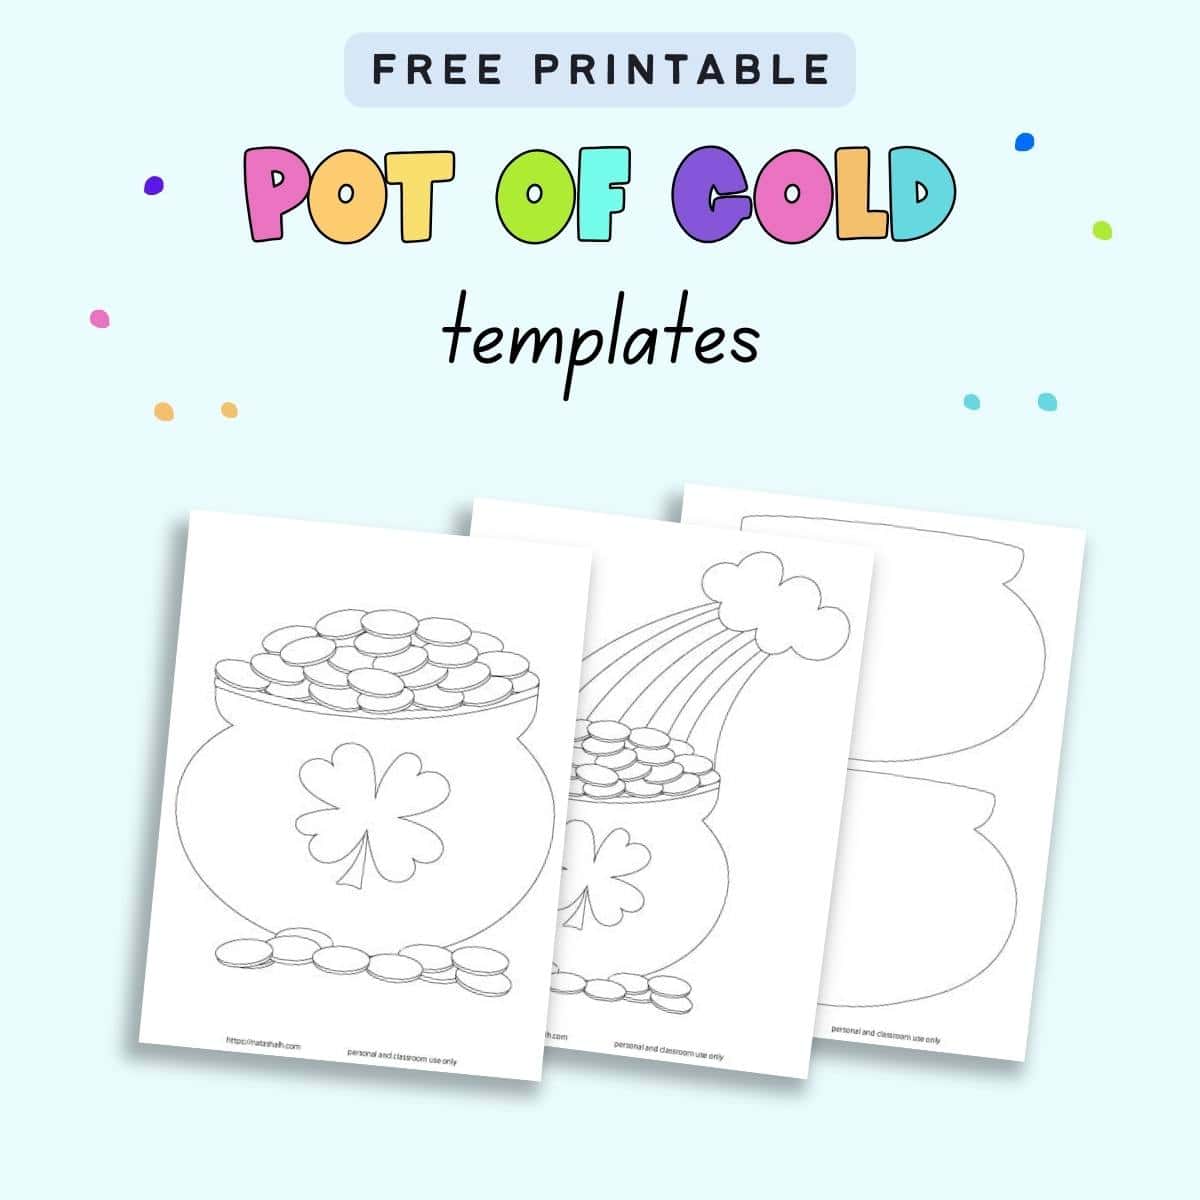 Text "free printable pot of gold templates" with a preview of three printable templates